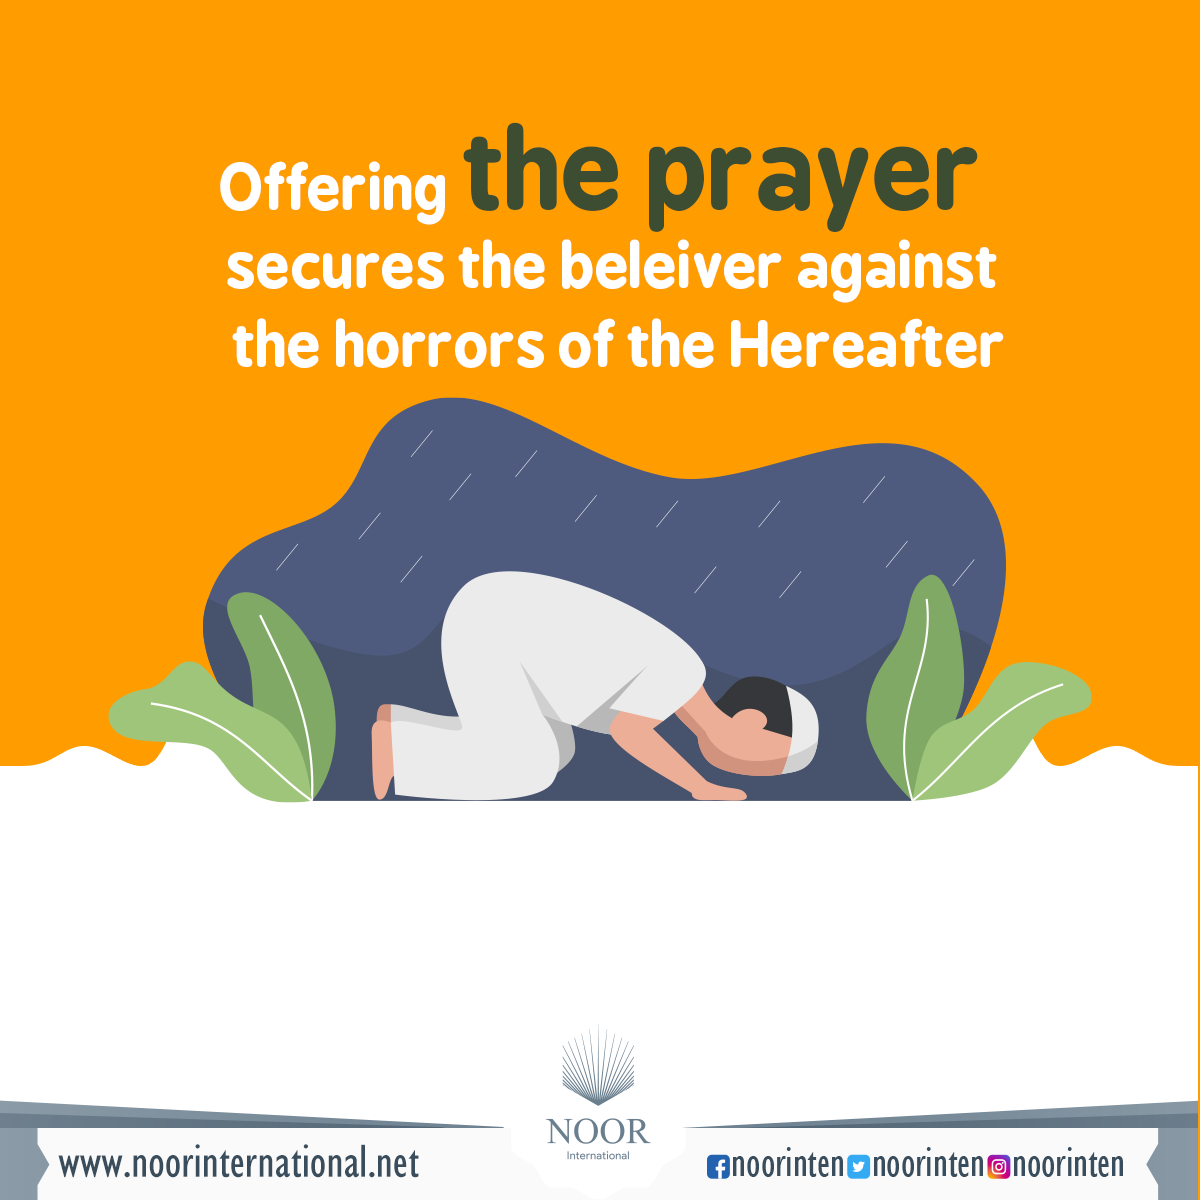 Offering the prayer secures the beleiver against the horrors of the Hereafter.